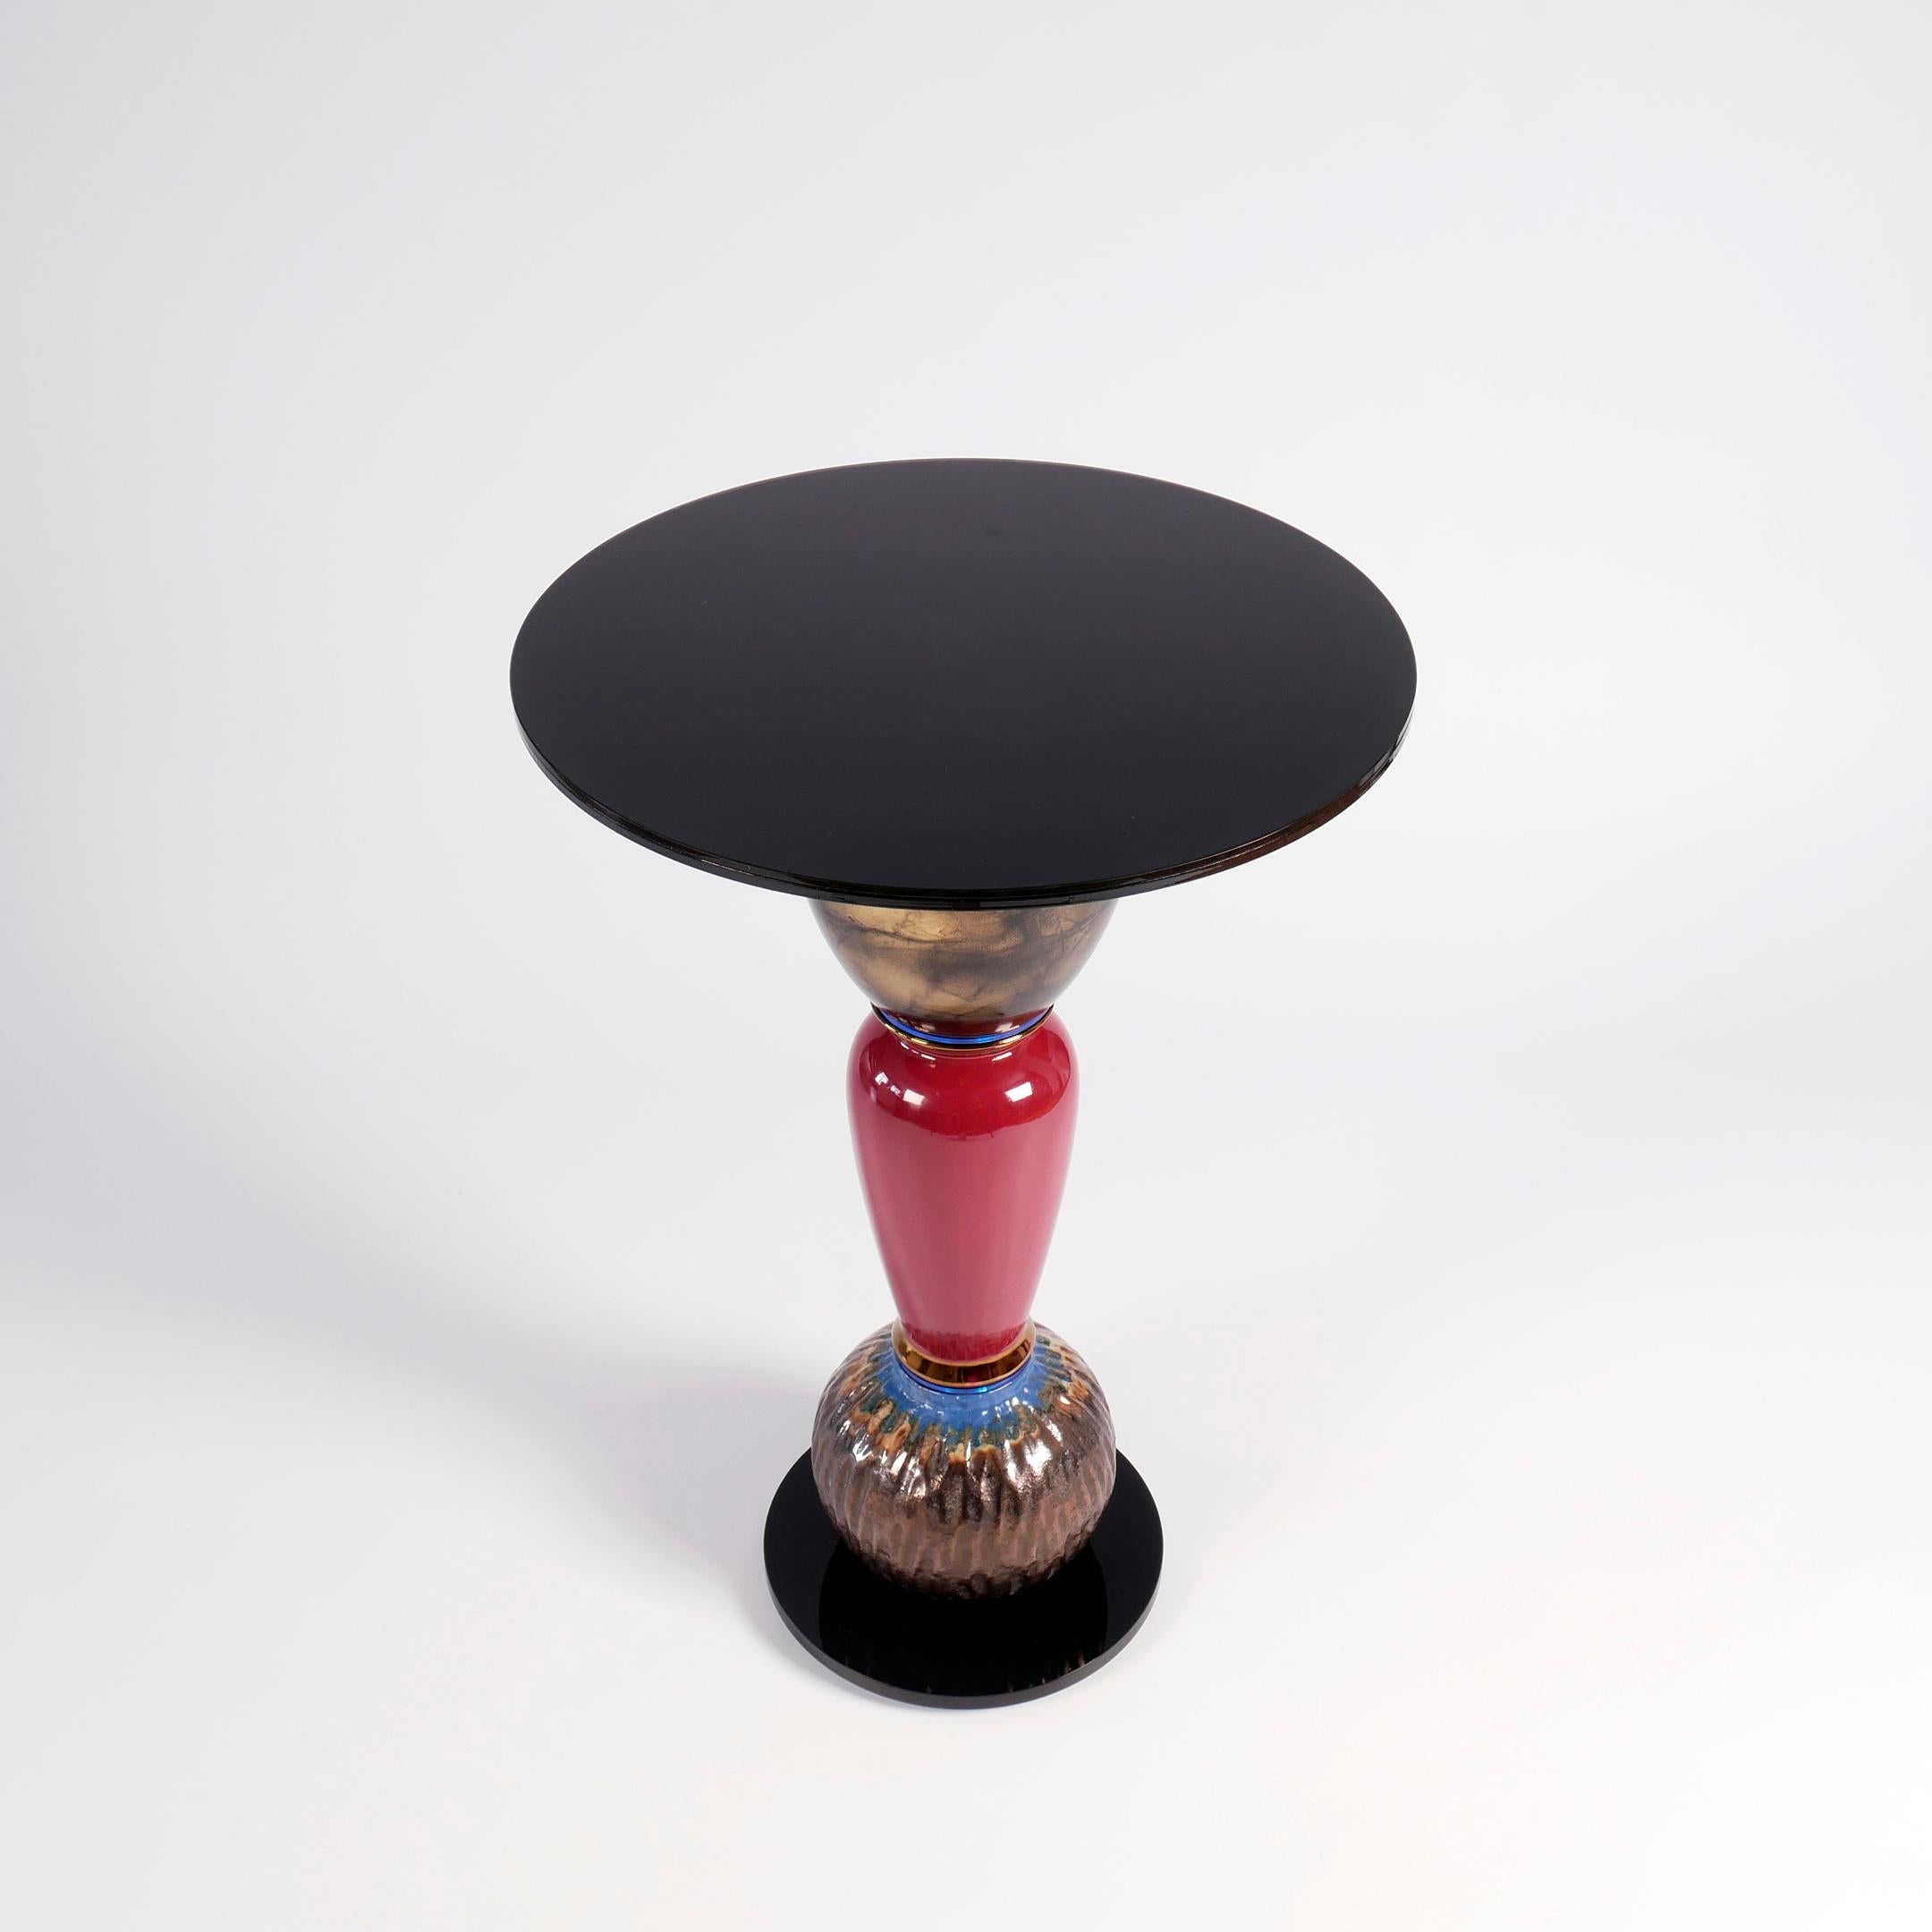 Mid-Century Modern 'Shut Your Eyes' Side Table, Vintage Ceramics and Glass, One-Off Piece